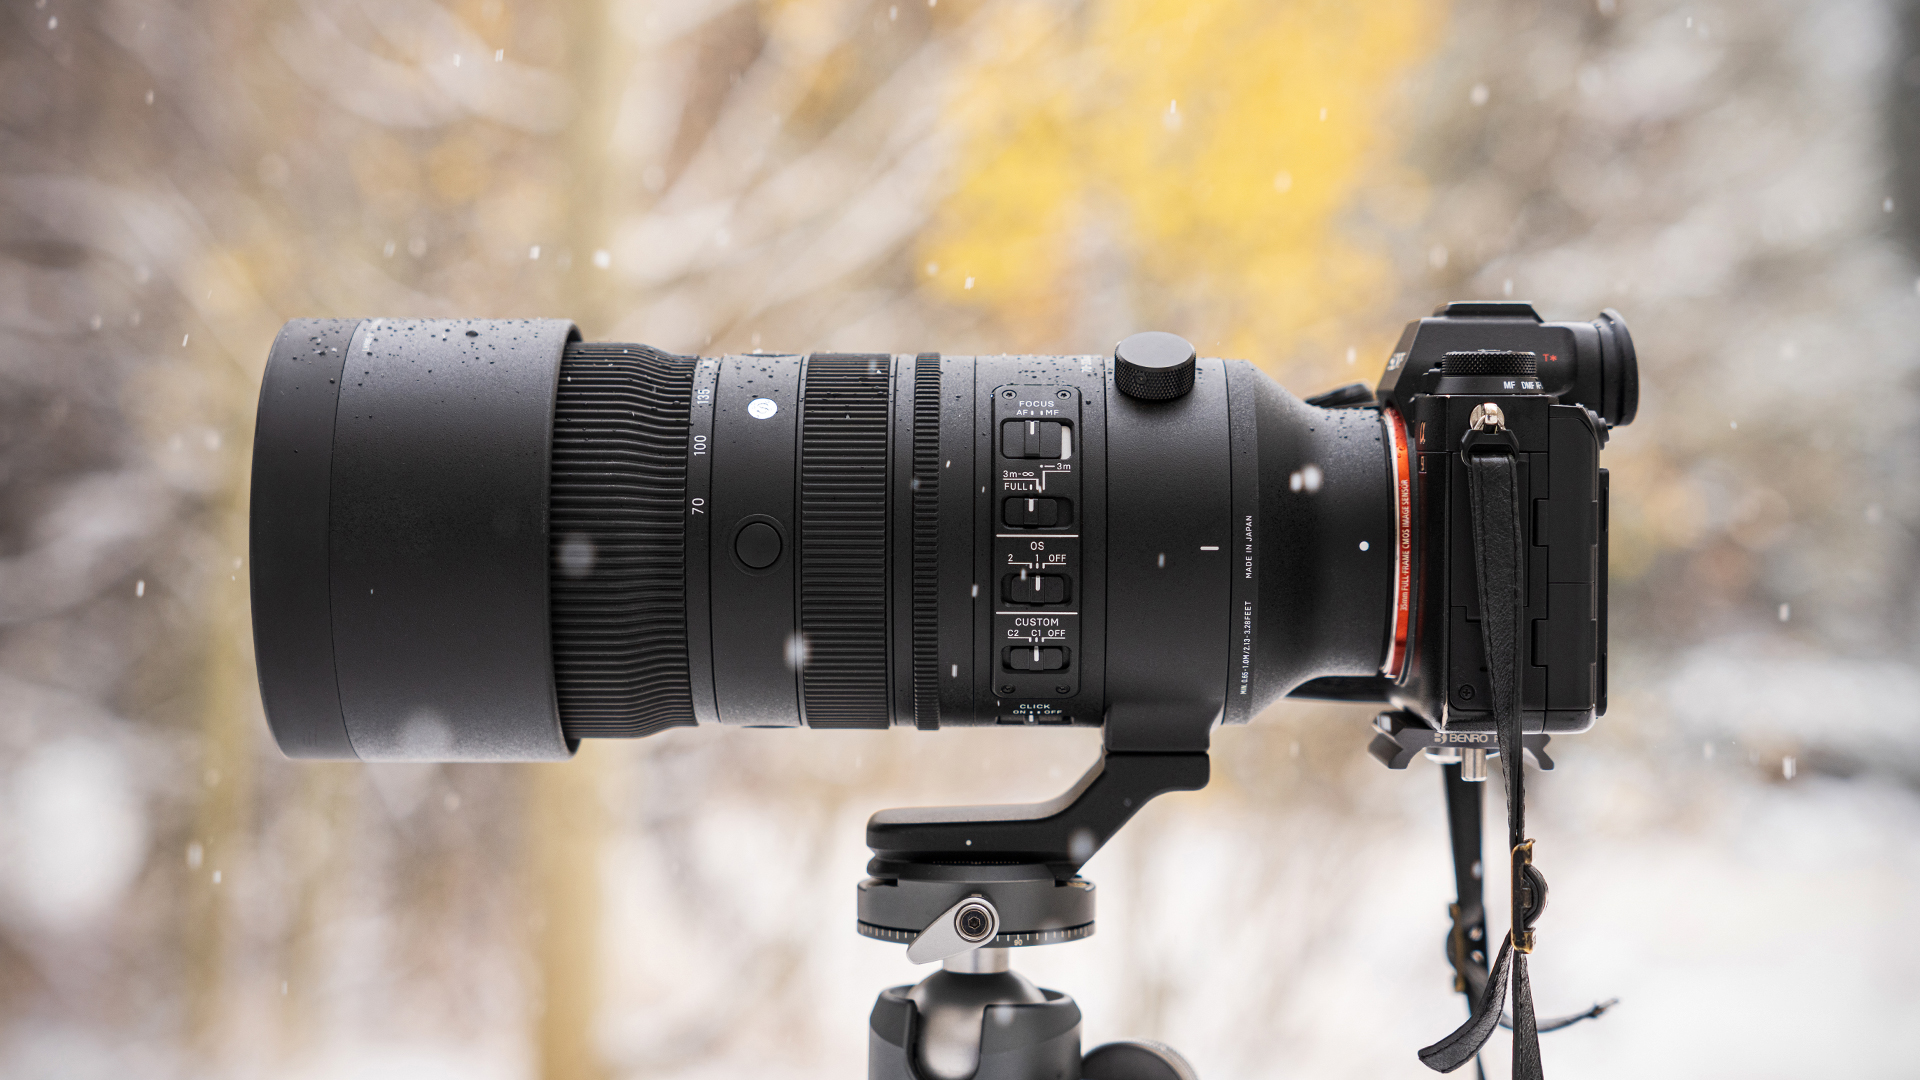 First Look: SIGMA 70-200mm F2.8 DG DN OS Sports Lens for Sony E ...